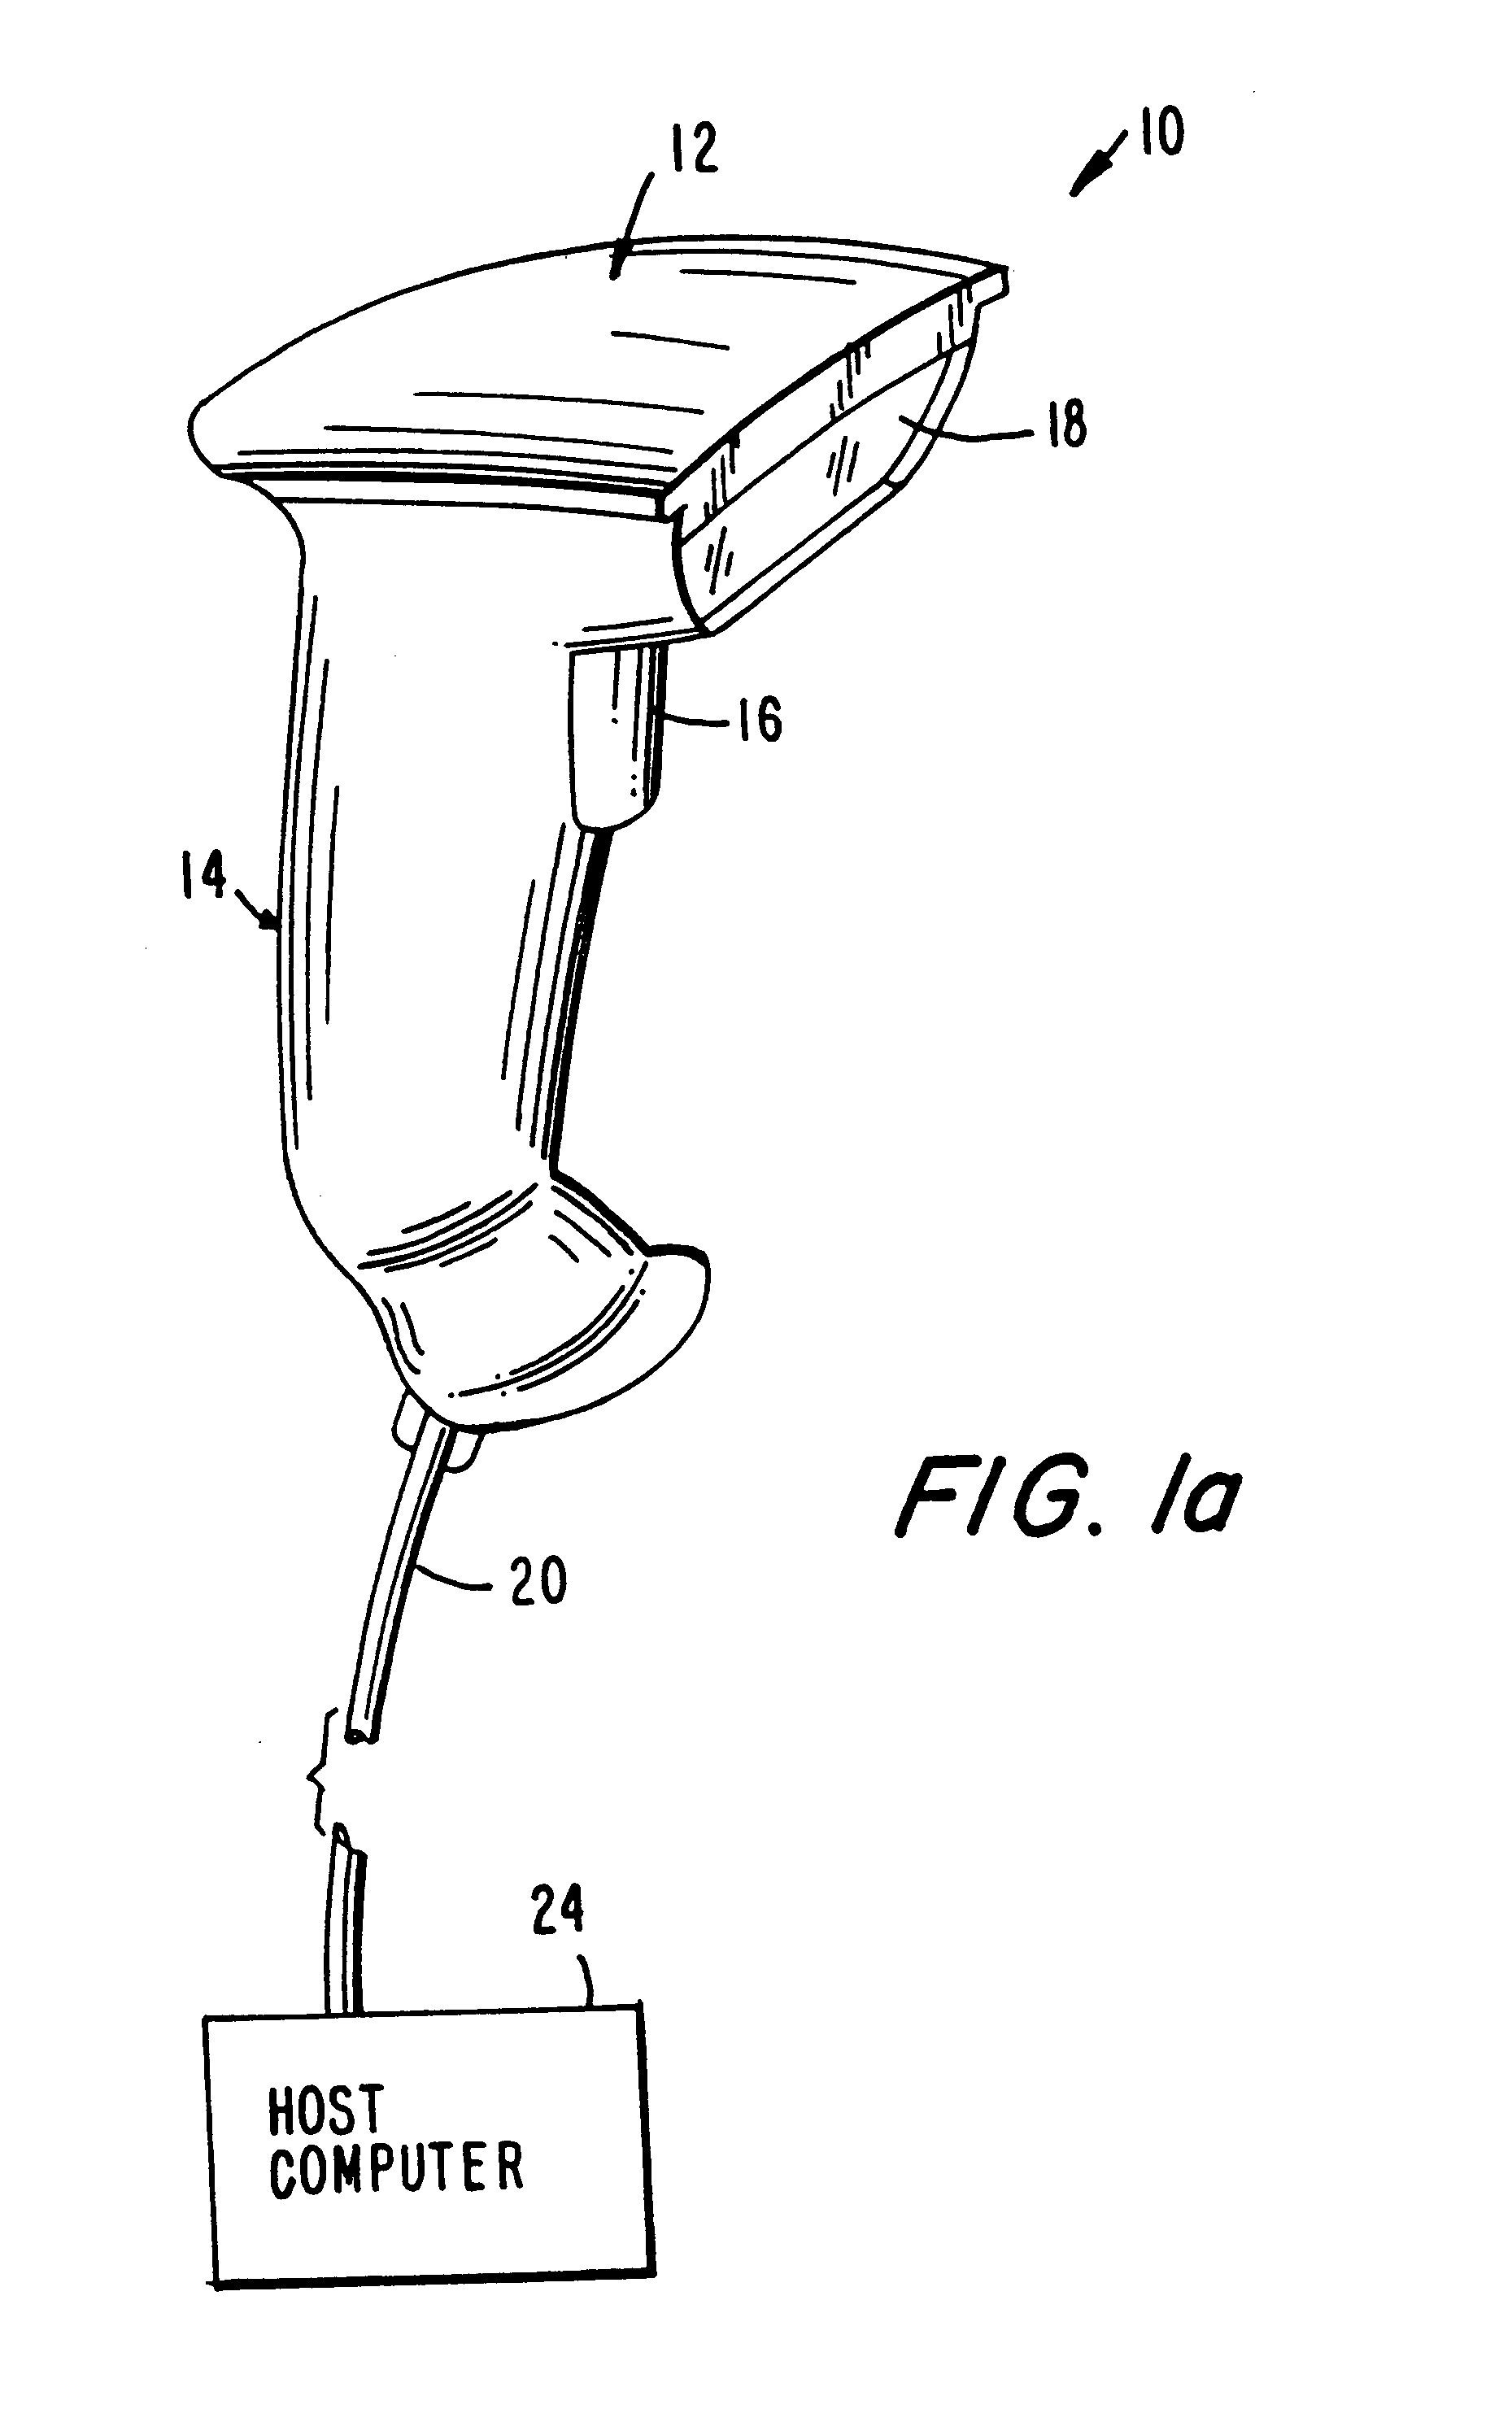 Bar code reader with an integrated scanning component module mountable on printed circuit board